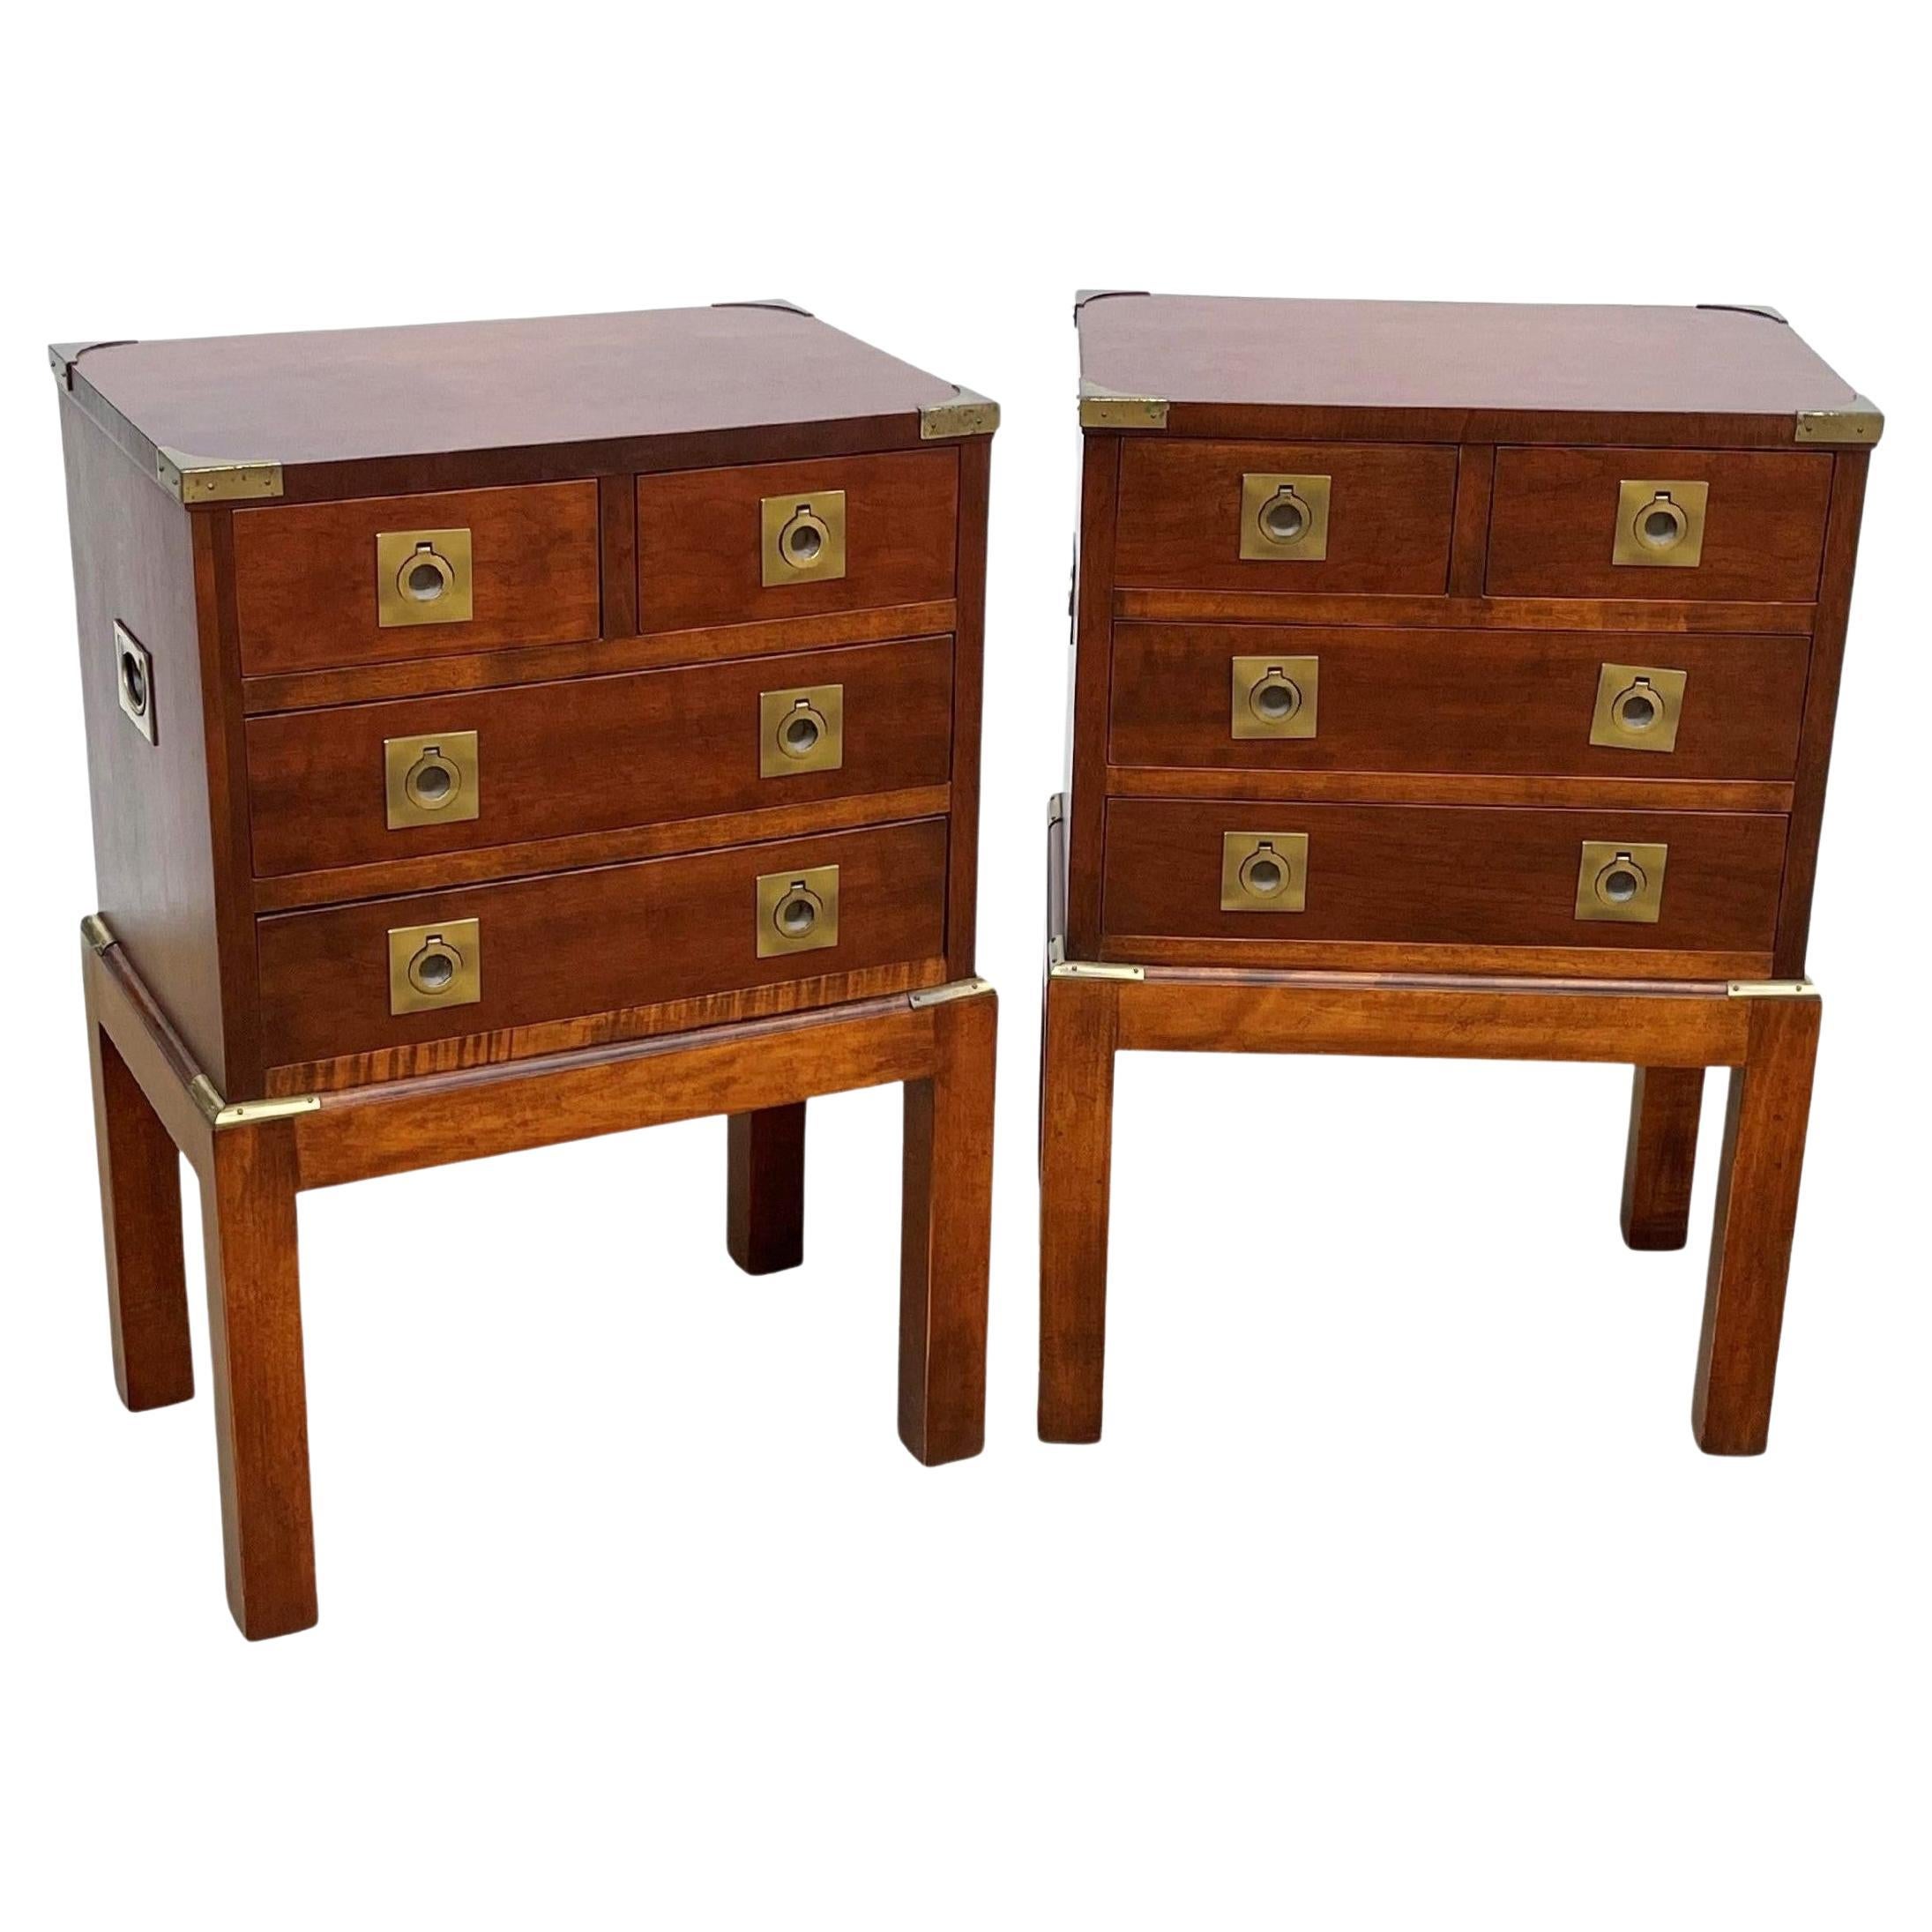 Pair of Mahogany Military Campaign Chests on Stands or Tables